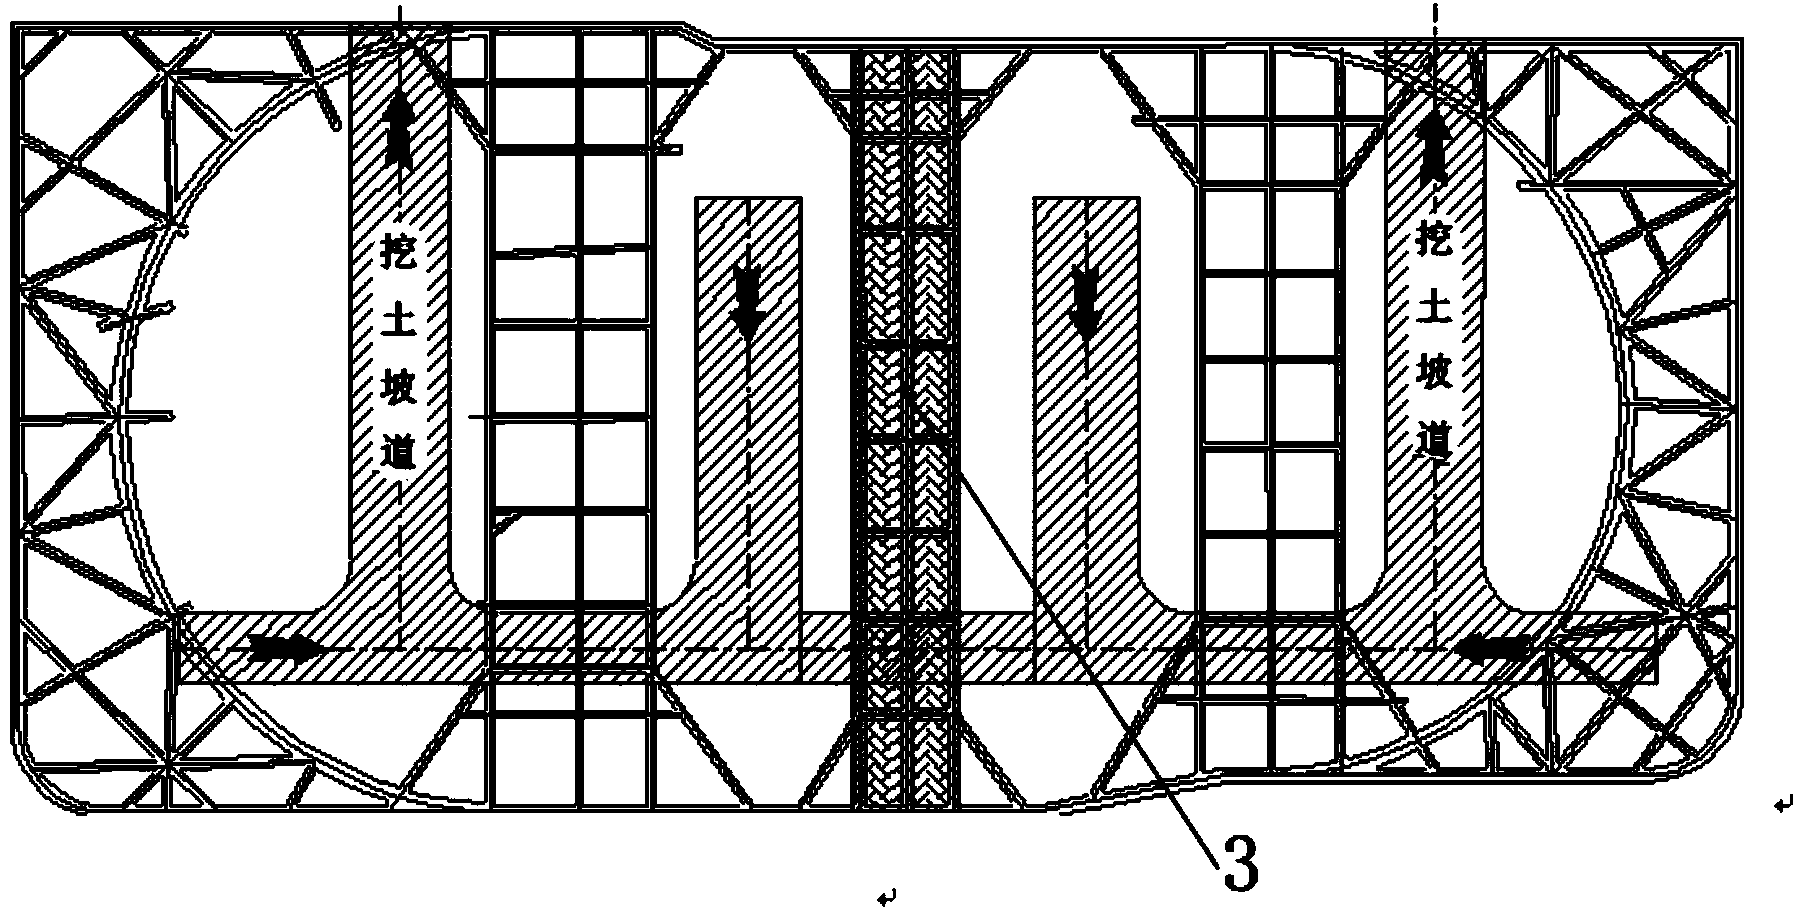 Large-scale deep foundation pit slope remaining soil digging and pit-in-pit concrete post casting construction method